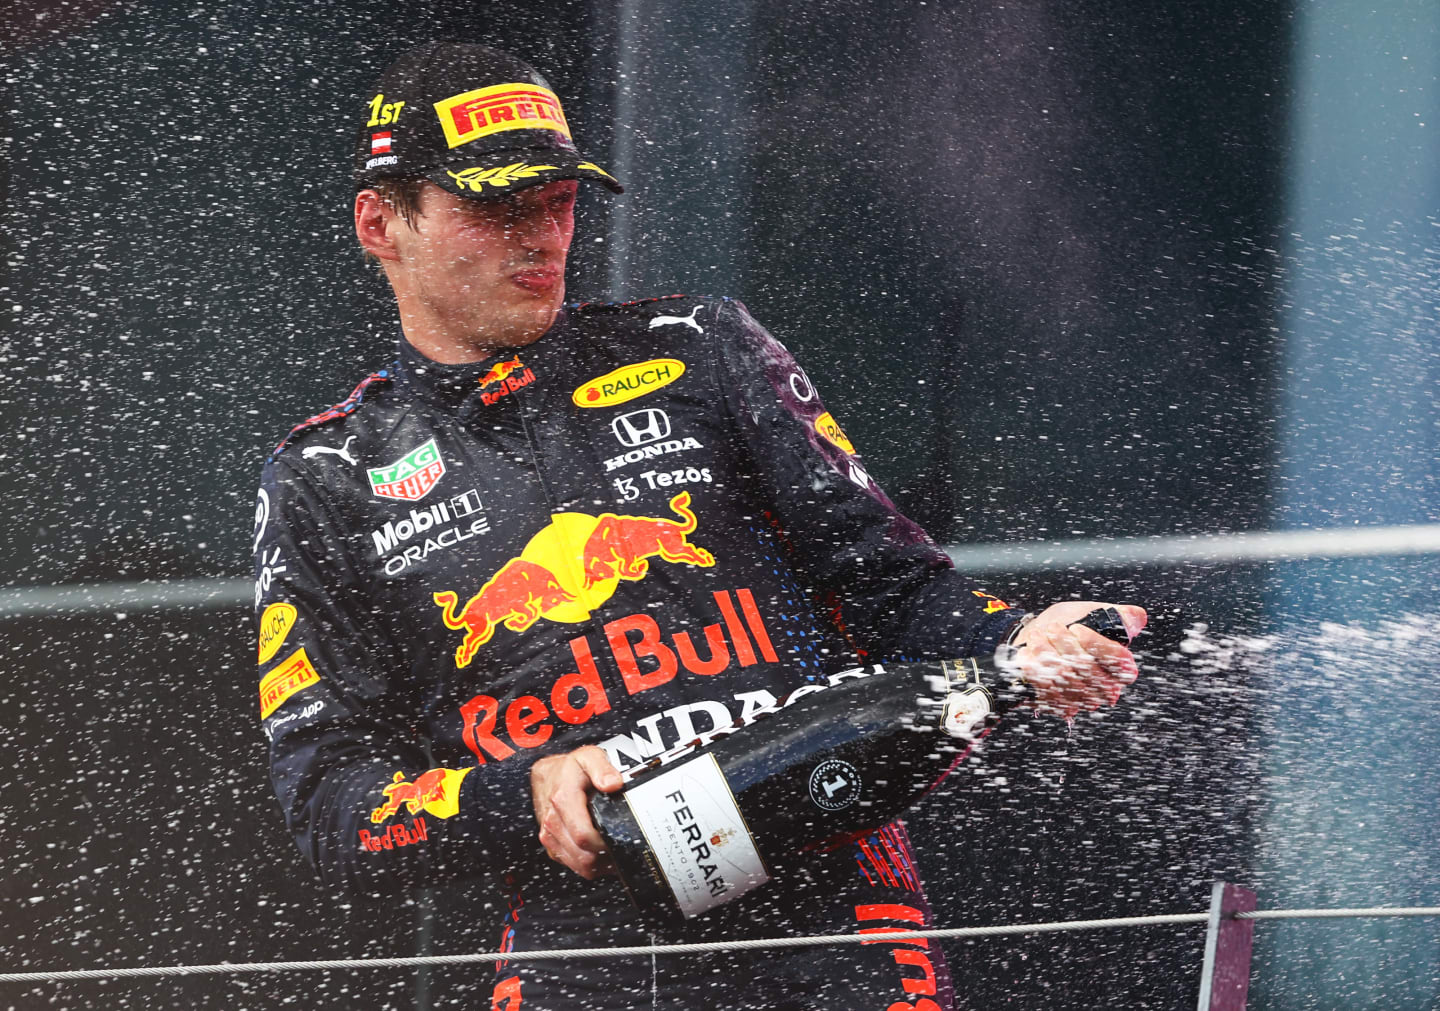 SPIELBERG, AUSTRIA - JUNE 27: Race winner Max Verstappen of Netherlands and Red Bull Racing celebrates on the podium during the F1 Grand Prix of Styria at Red Bull Ring on June 27, 2021 in Spielberg, Austria. (Photo by Bryn Lennon/Getty Images)